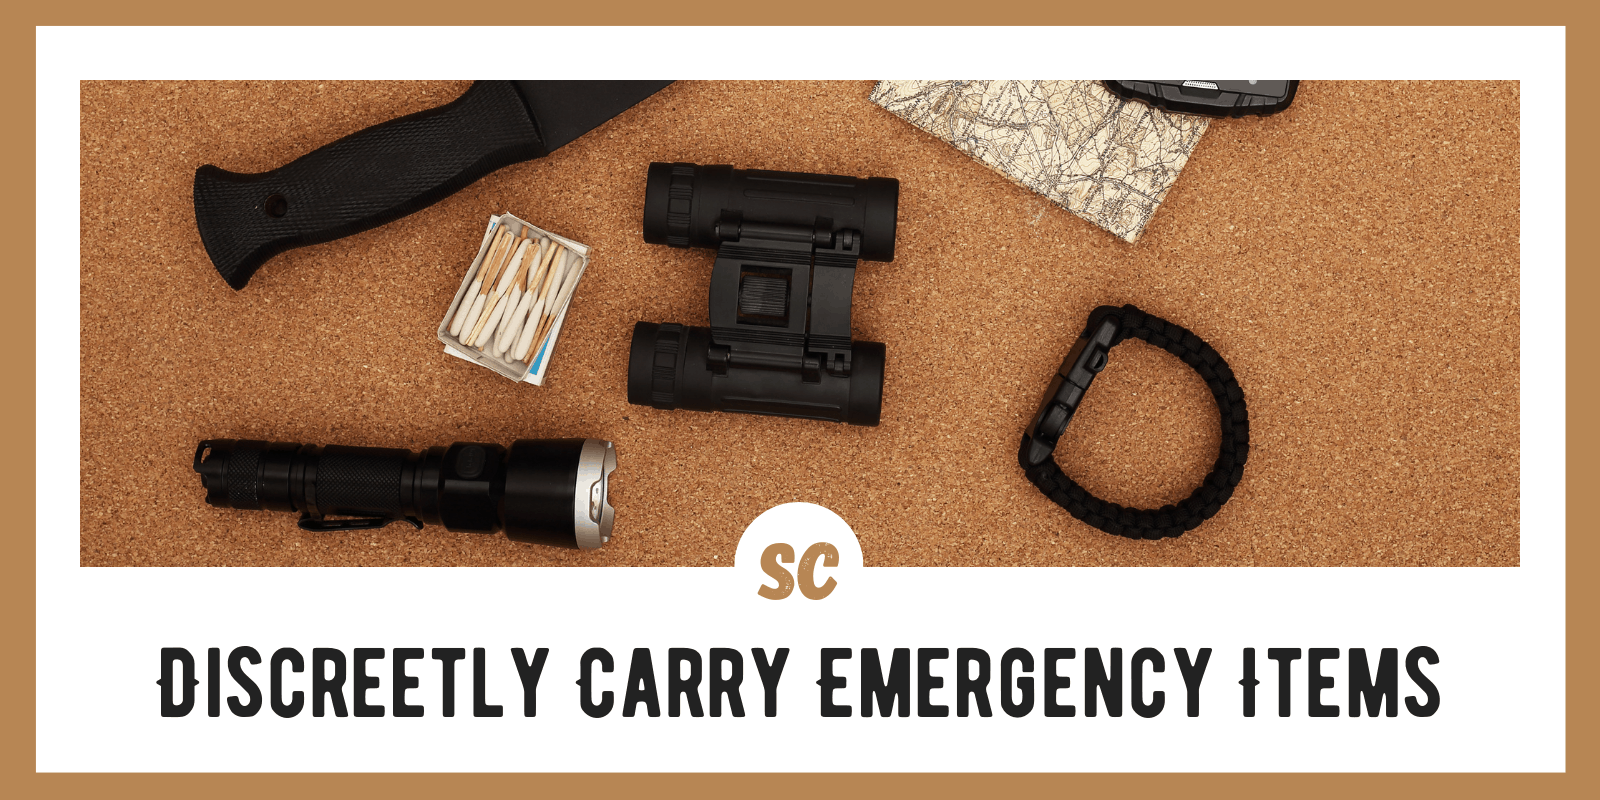 How To Discreetly Carry Emergency Items: 13 Top Tips by Experts